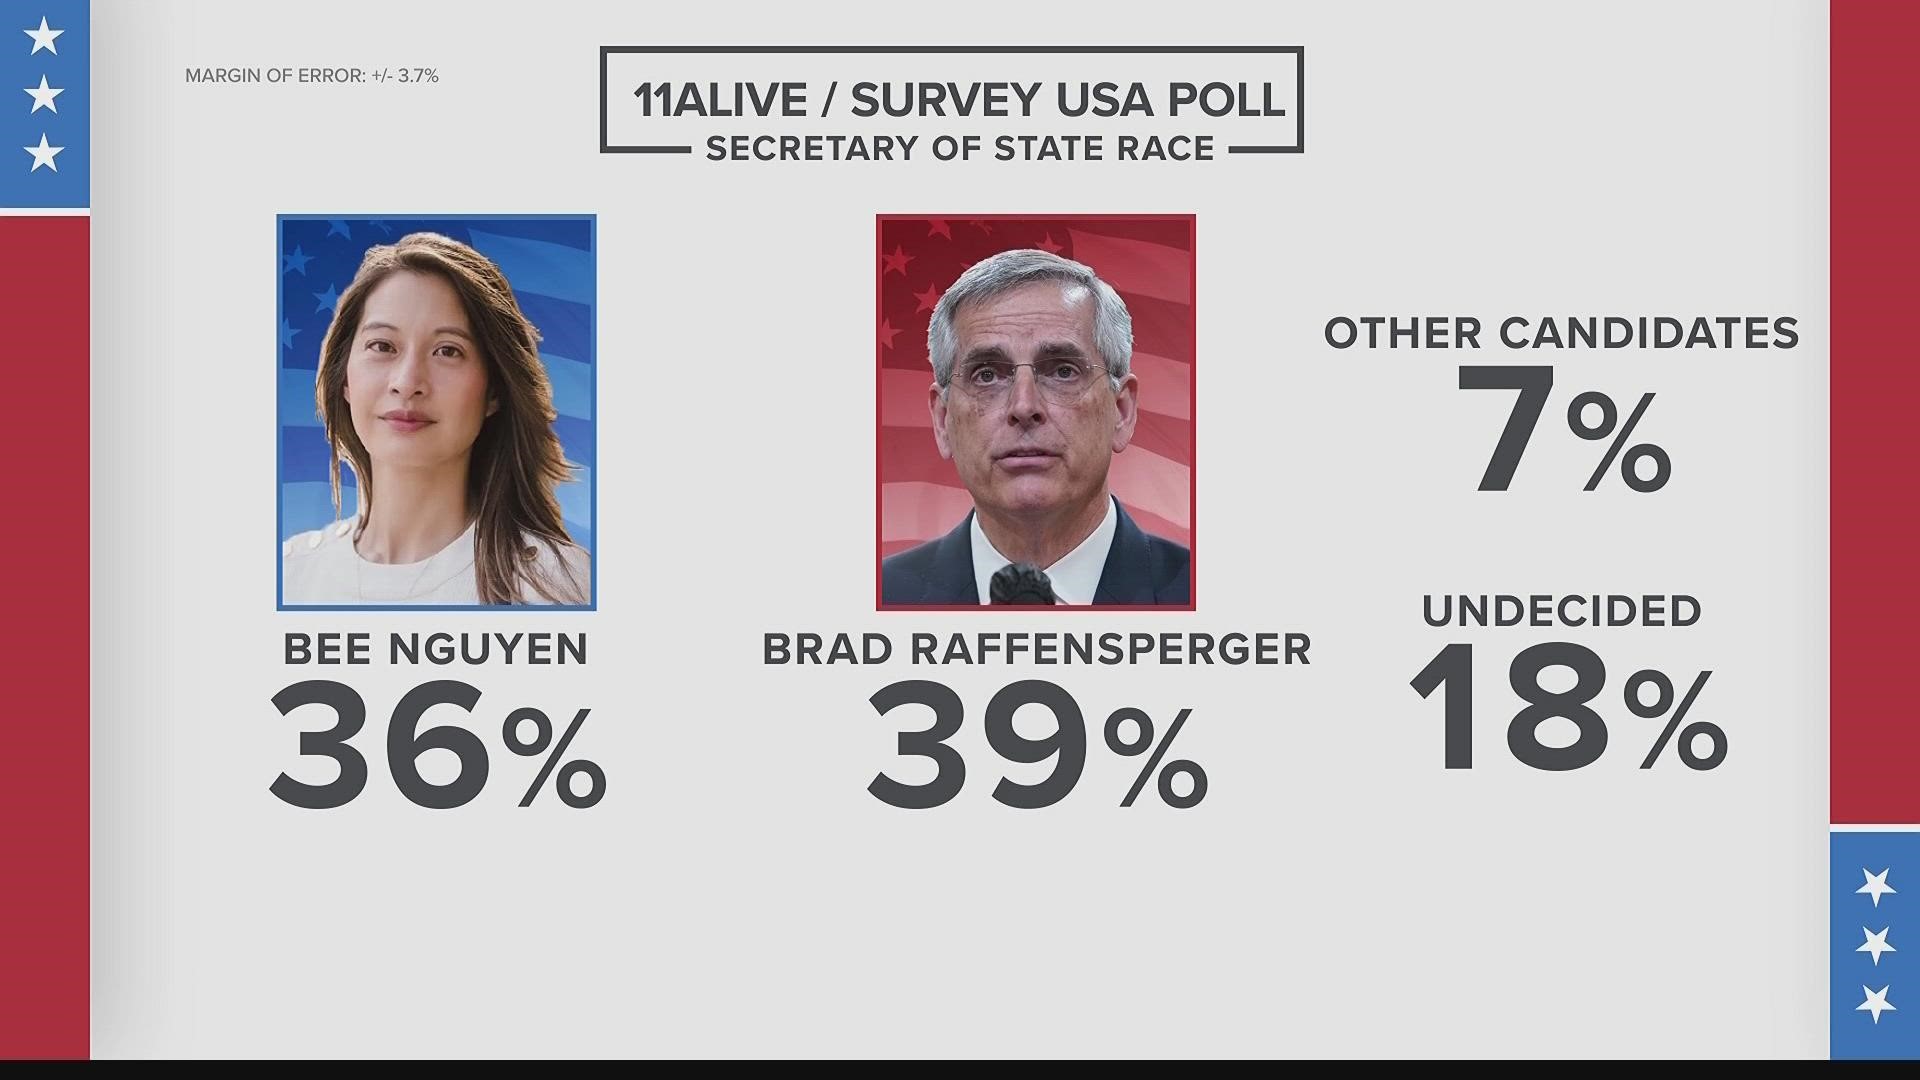 The incumbent Brad Raffensperger has just a 3% lead according to 11Alive's poll from SurveyUSA.